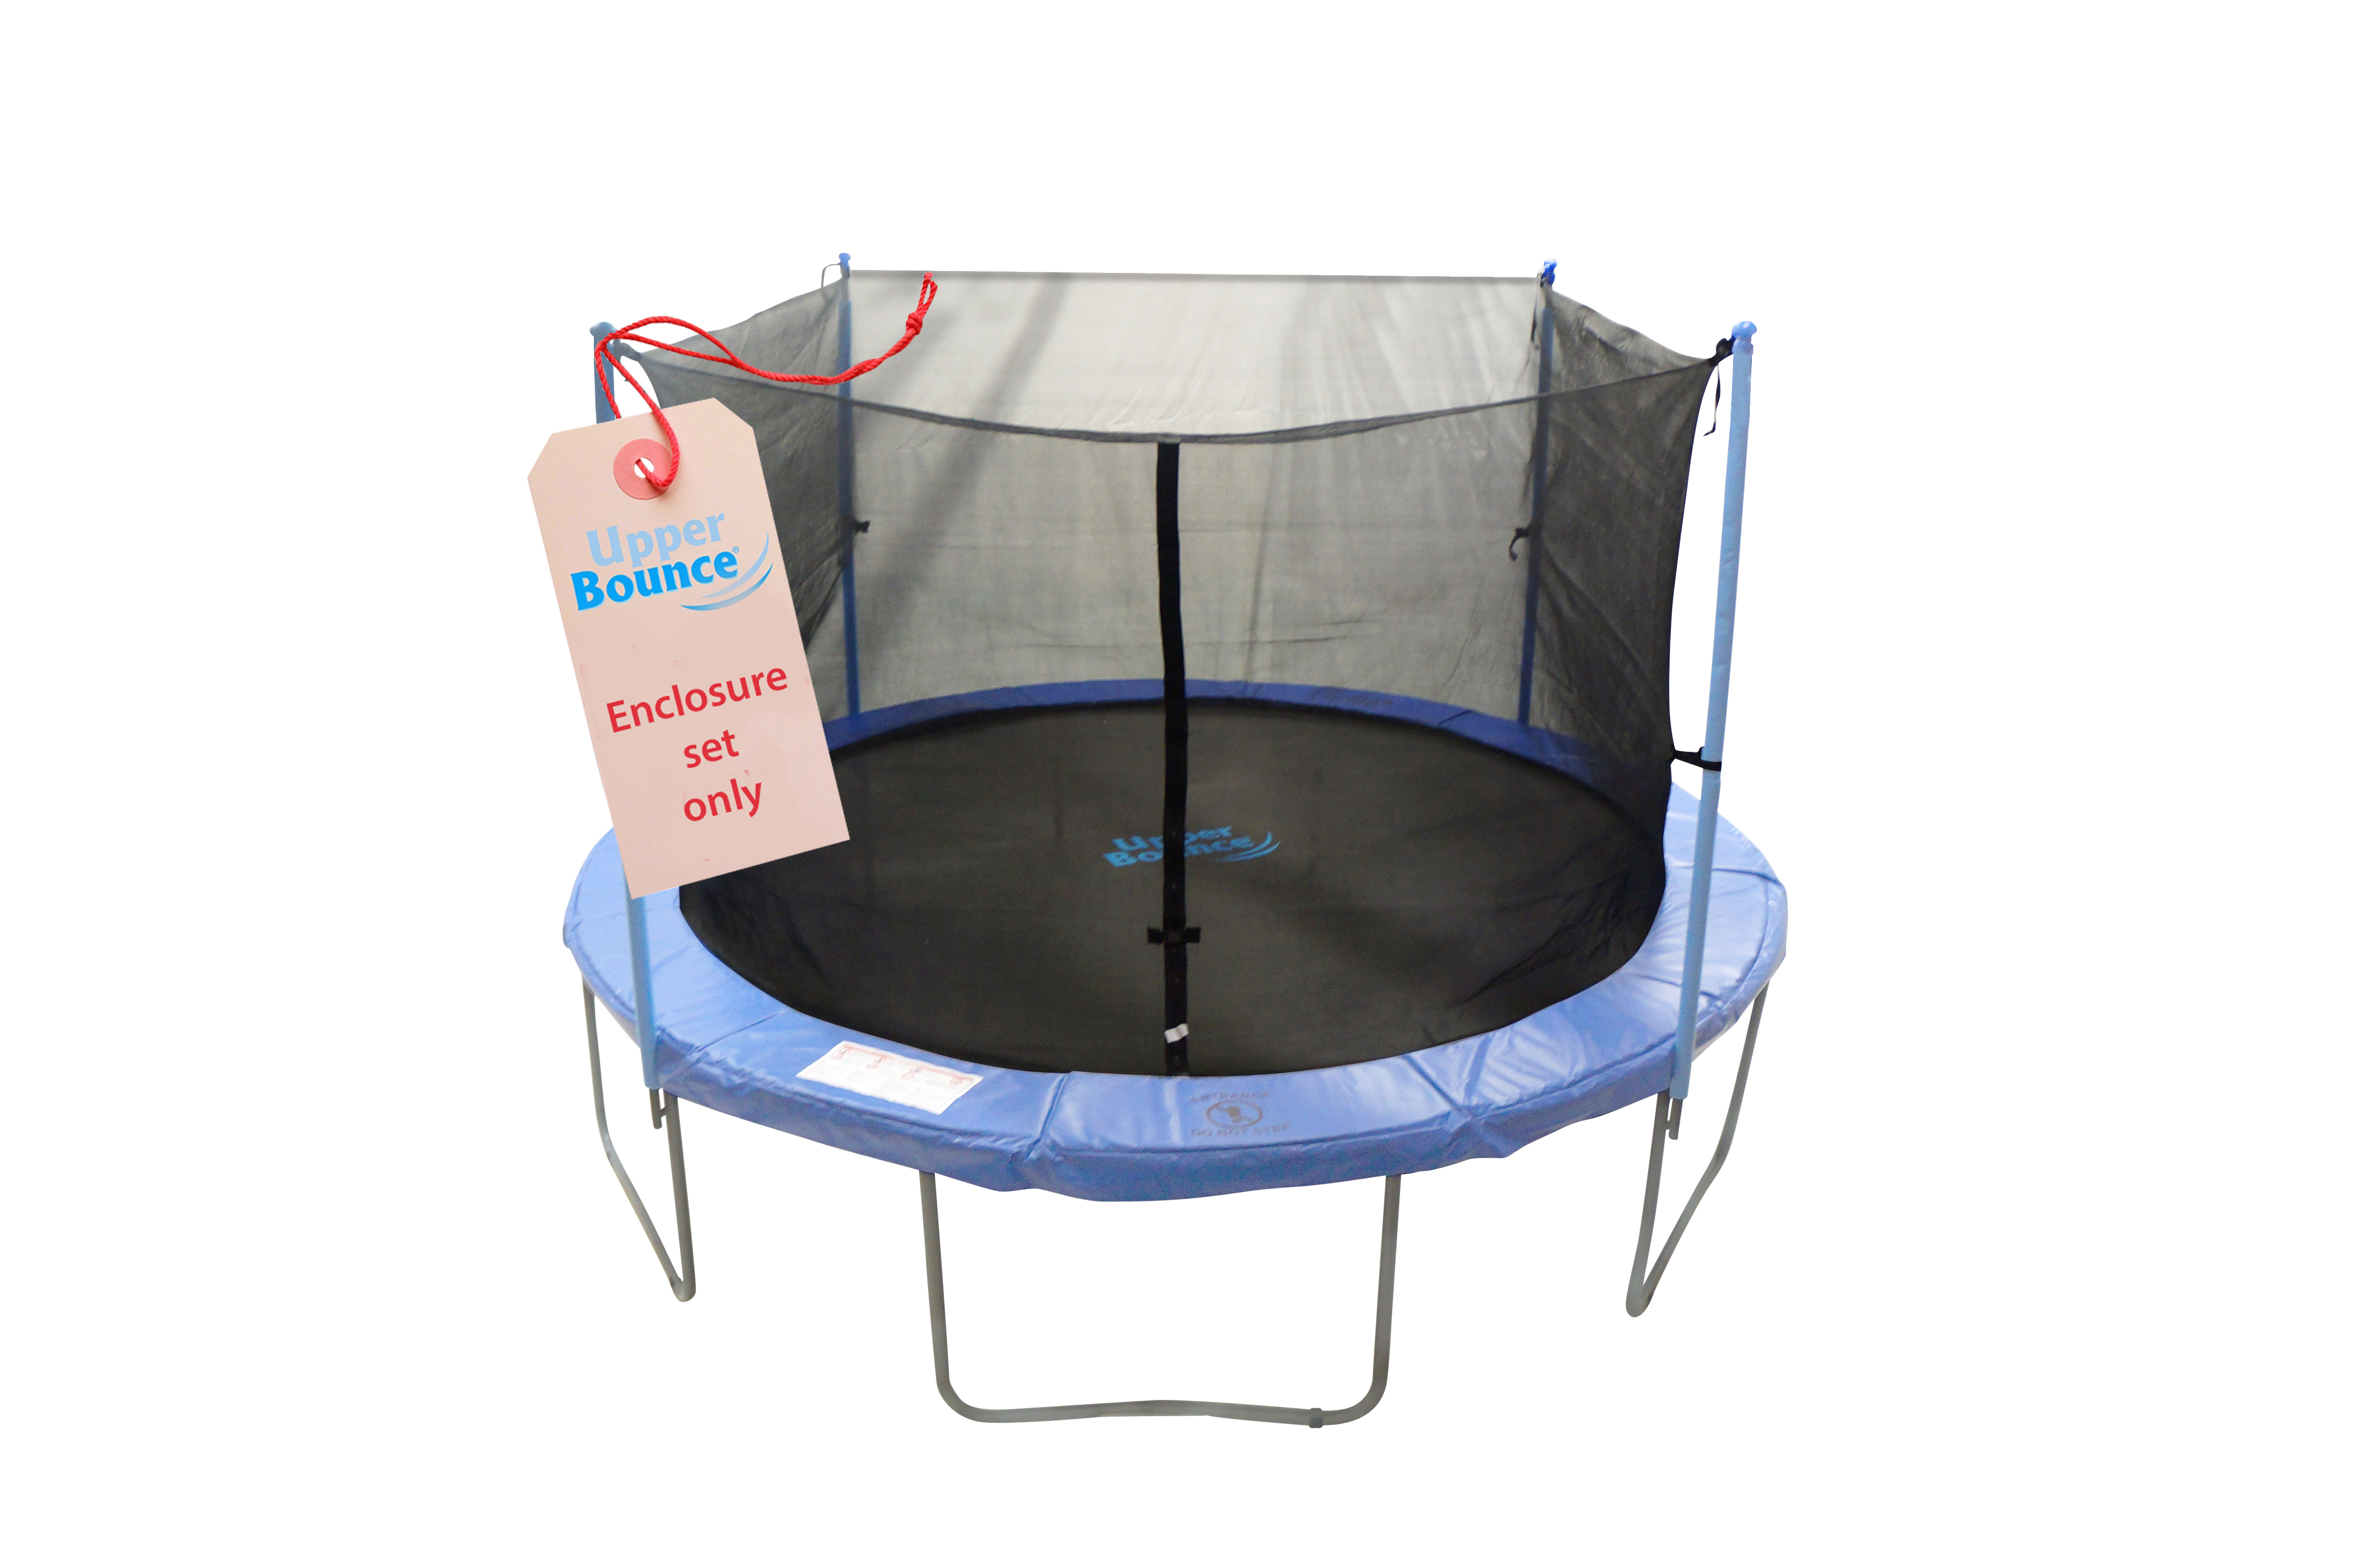 Trampoline Enclosure Set, to fit 14 FT. Round Frames, for 2 or 4 W-Shaped Legs -Set Includes: Net, Poles & Hardware Only - image 1 of 6